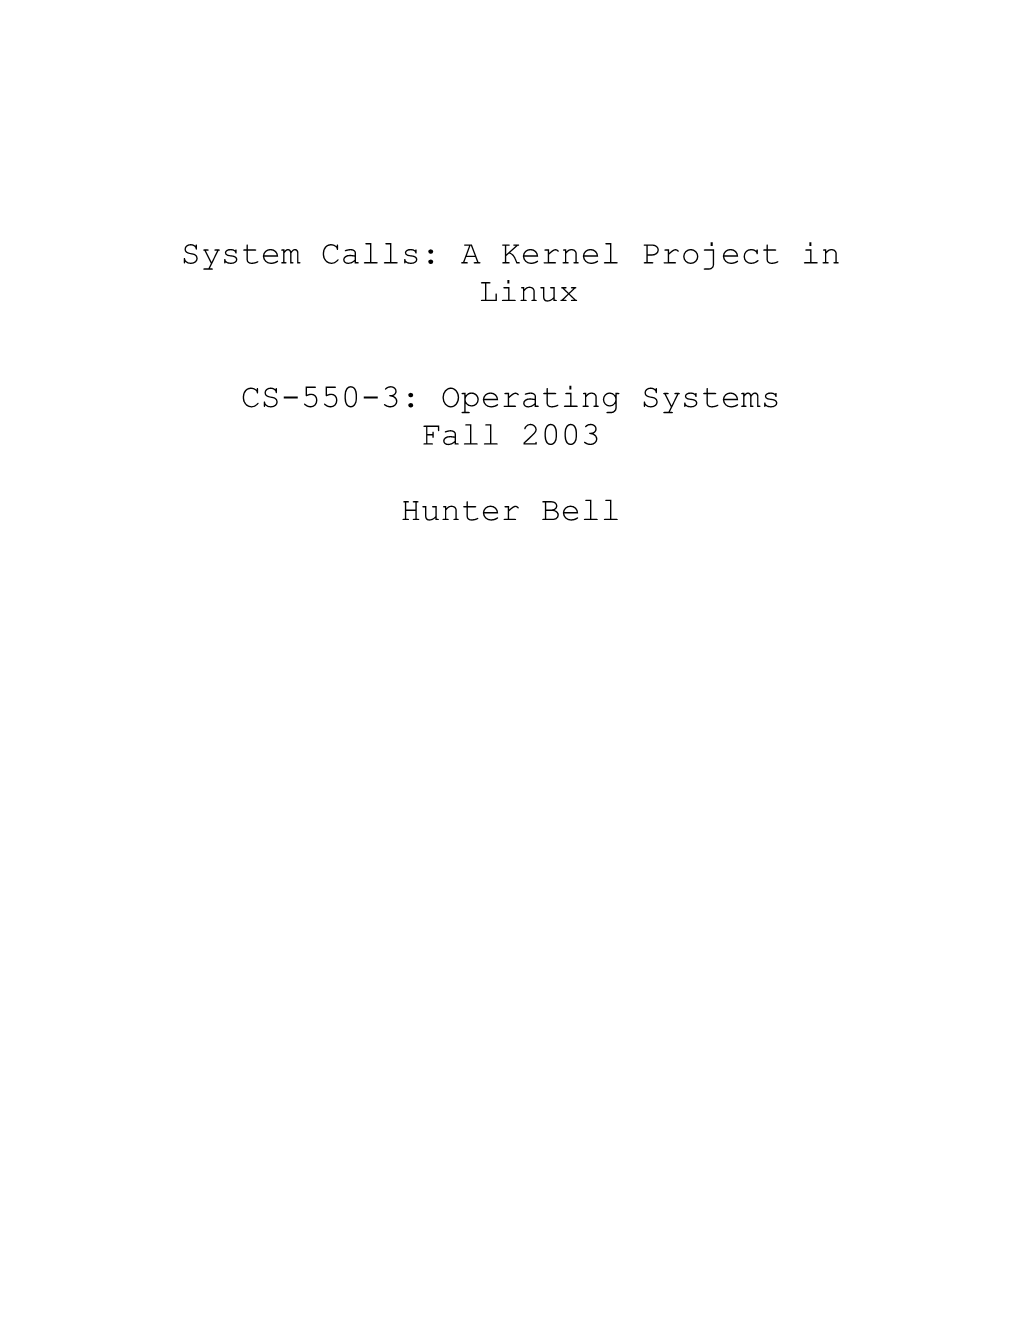 System Calls: a Kernel Project in Linux